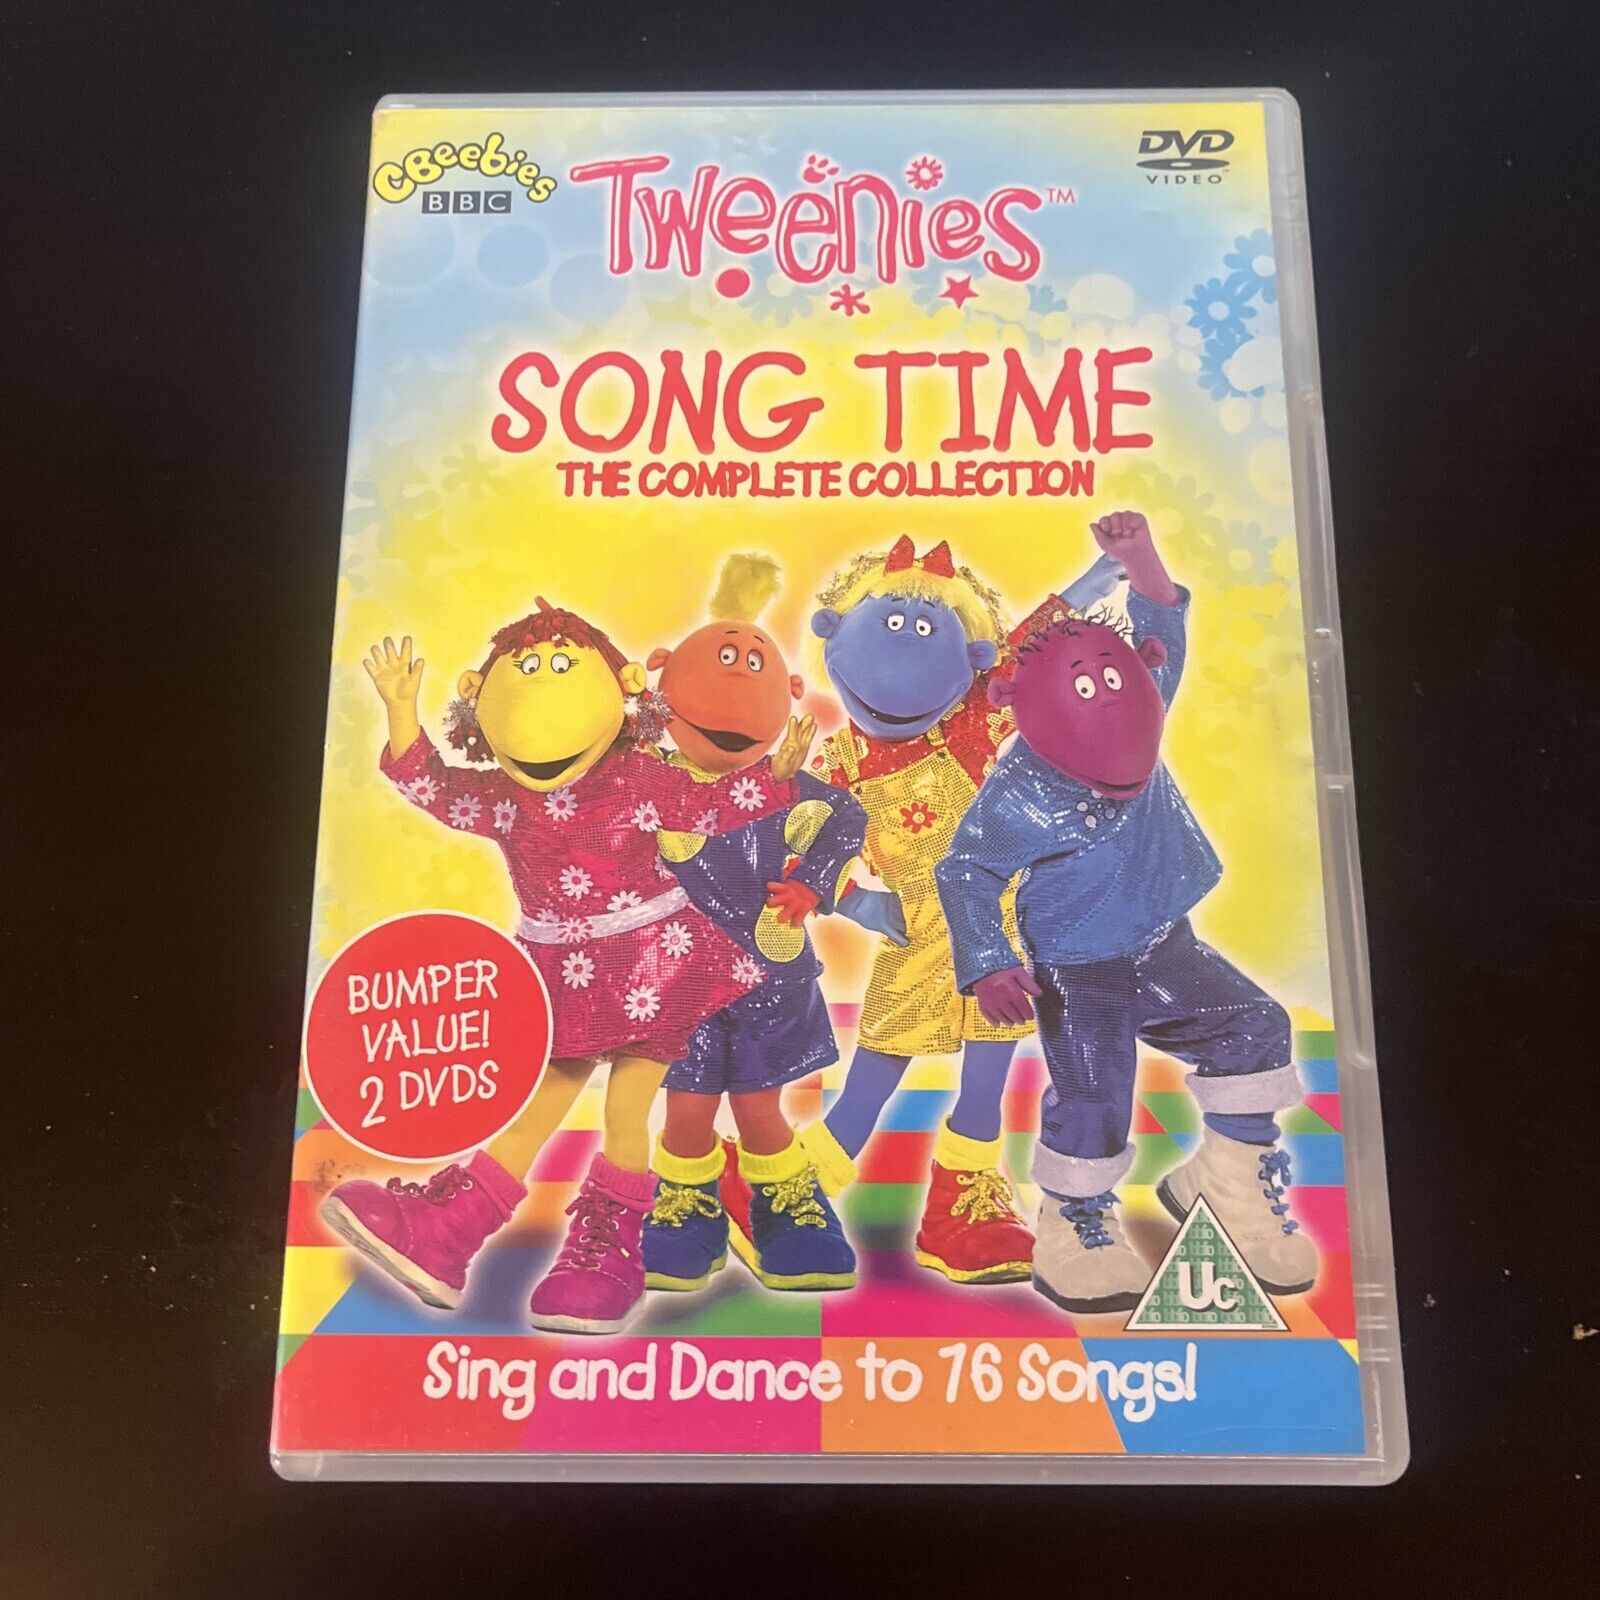 Tweenies - Song Time - The Complete Collection (DVD, 2002, 2-Disc) Reg ...